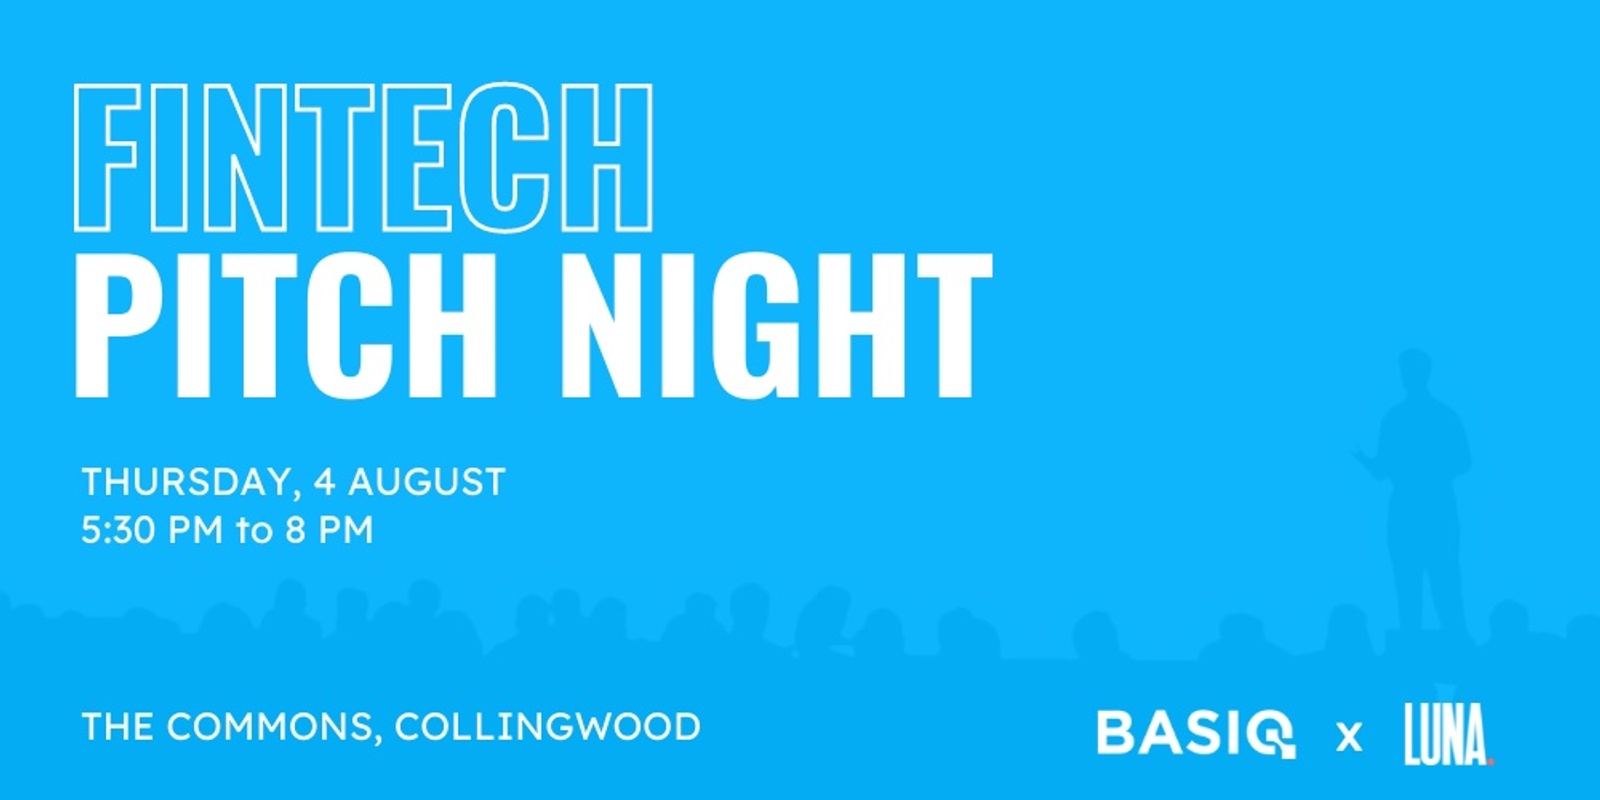 Banner image for Fintech Pitch Night